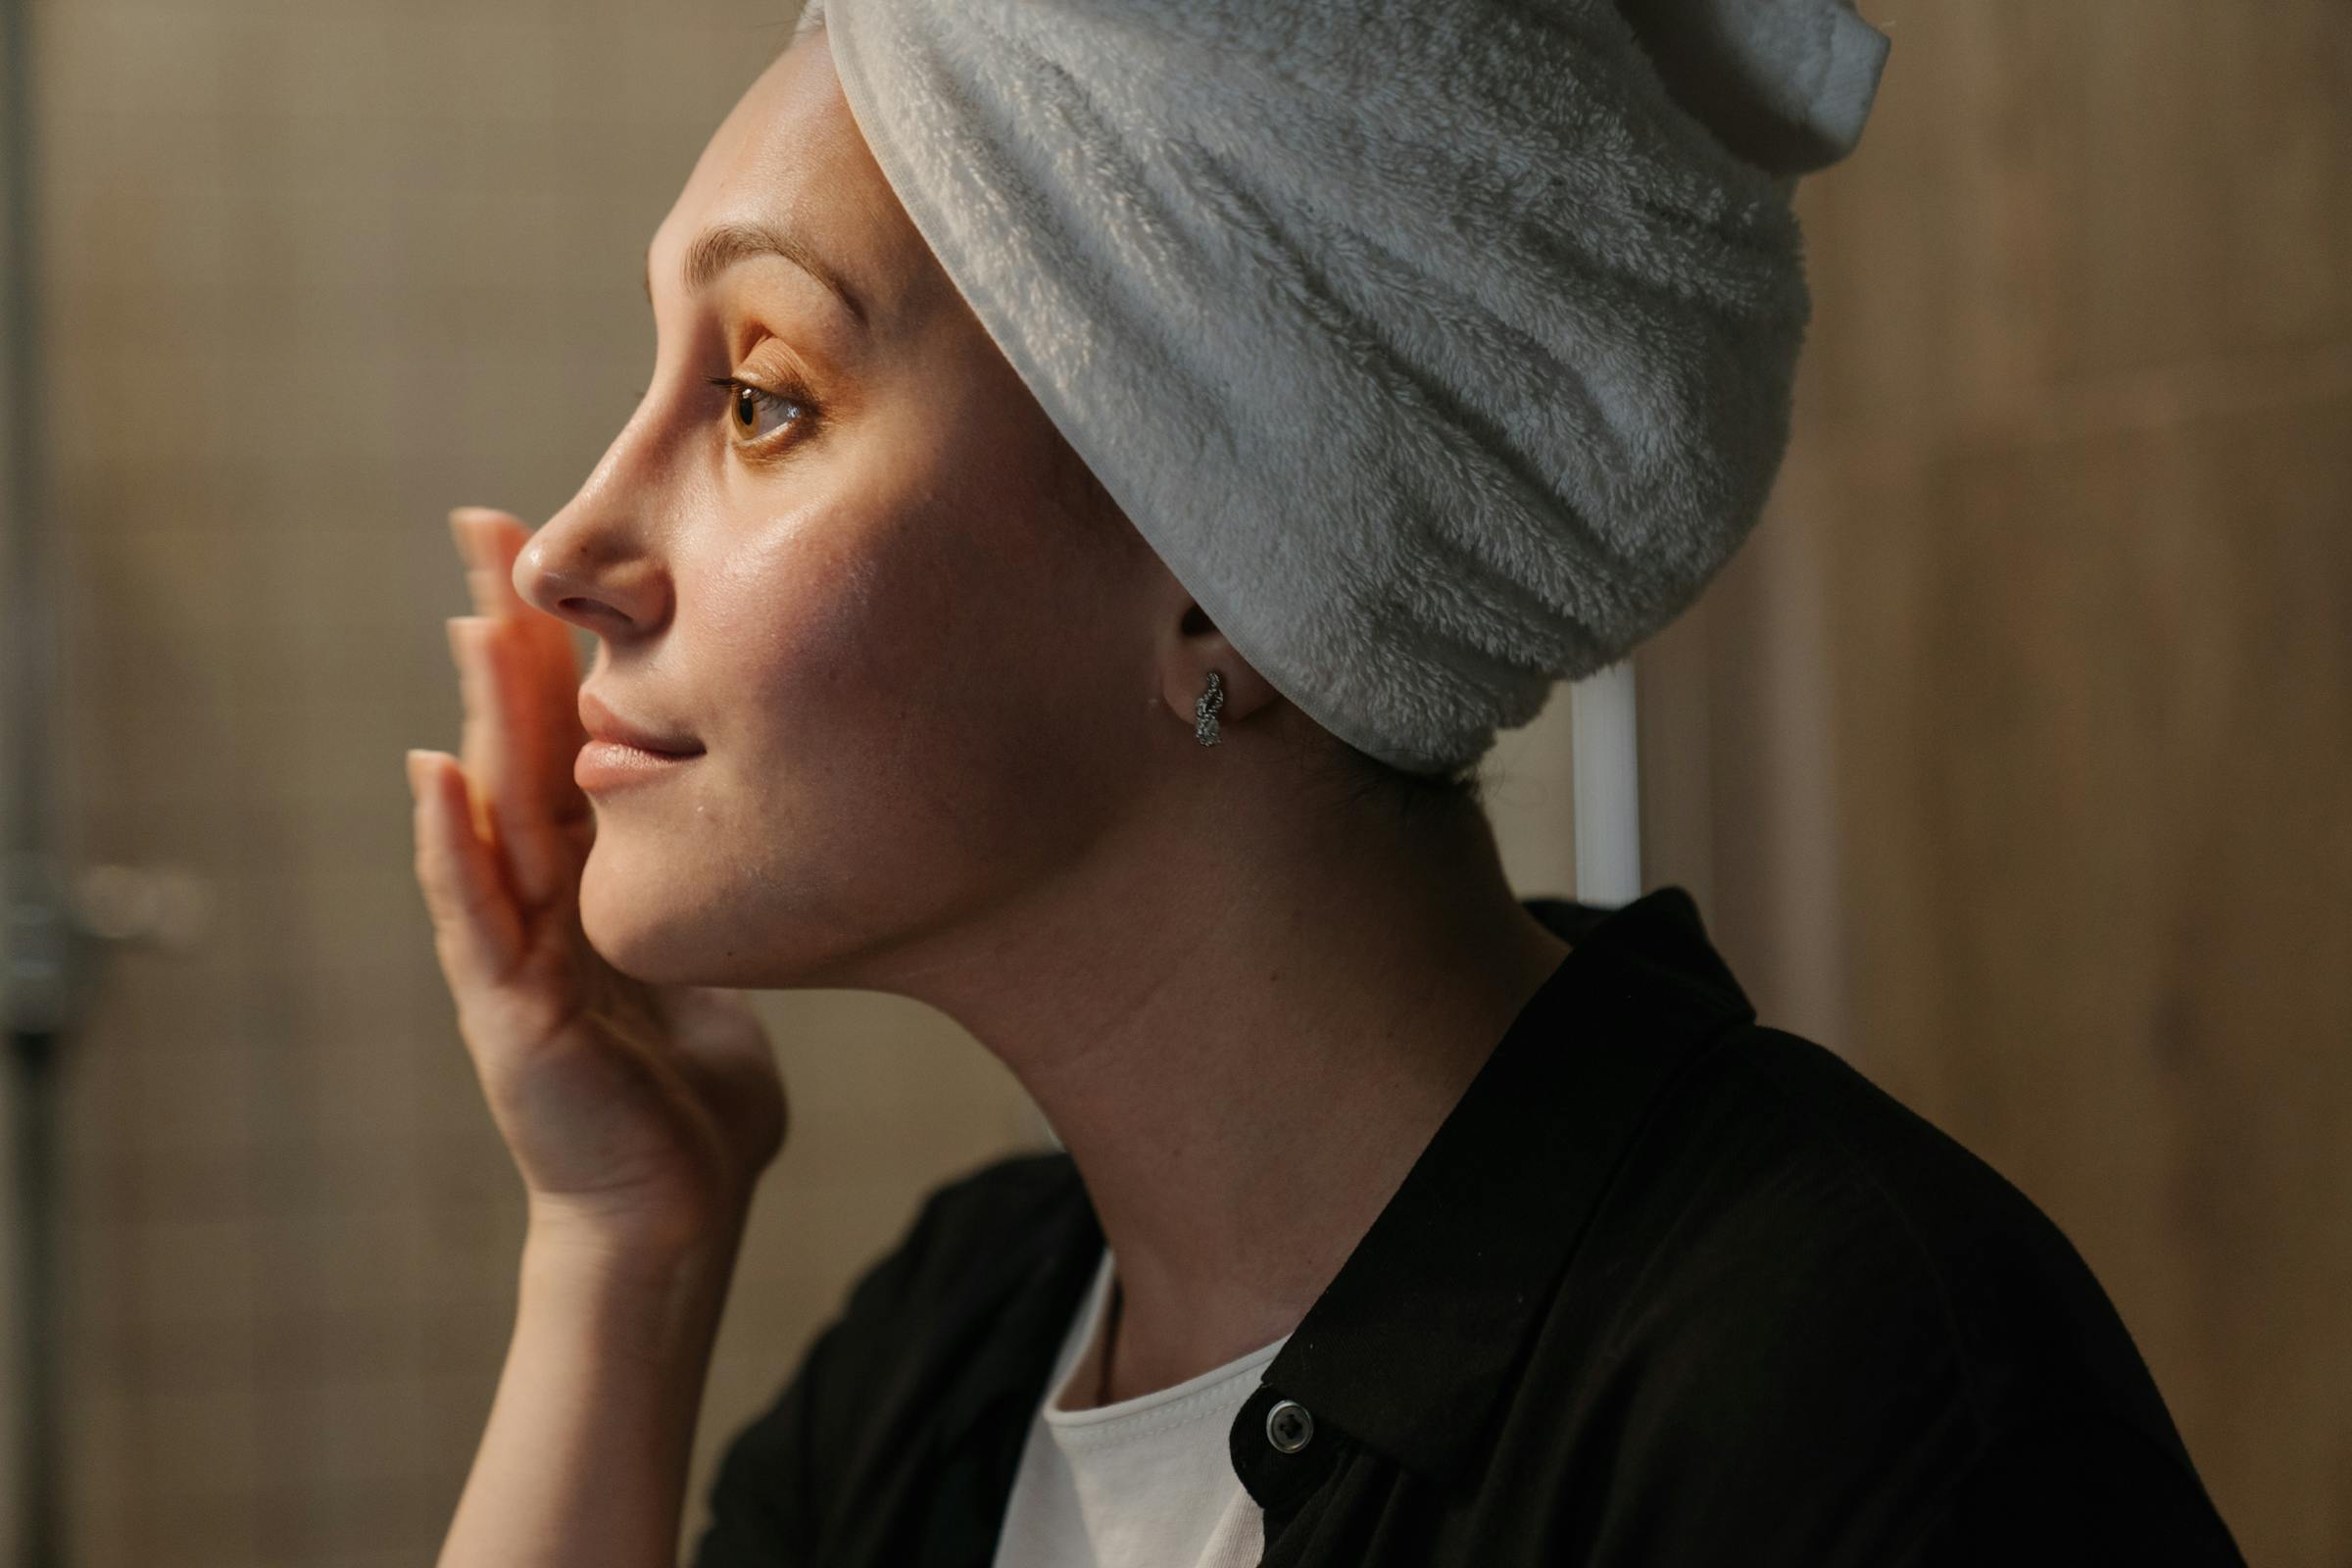 Woman putting face cream on | Source: Pexels